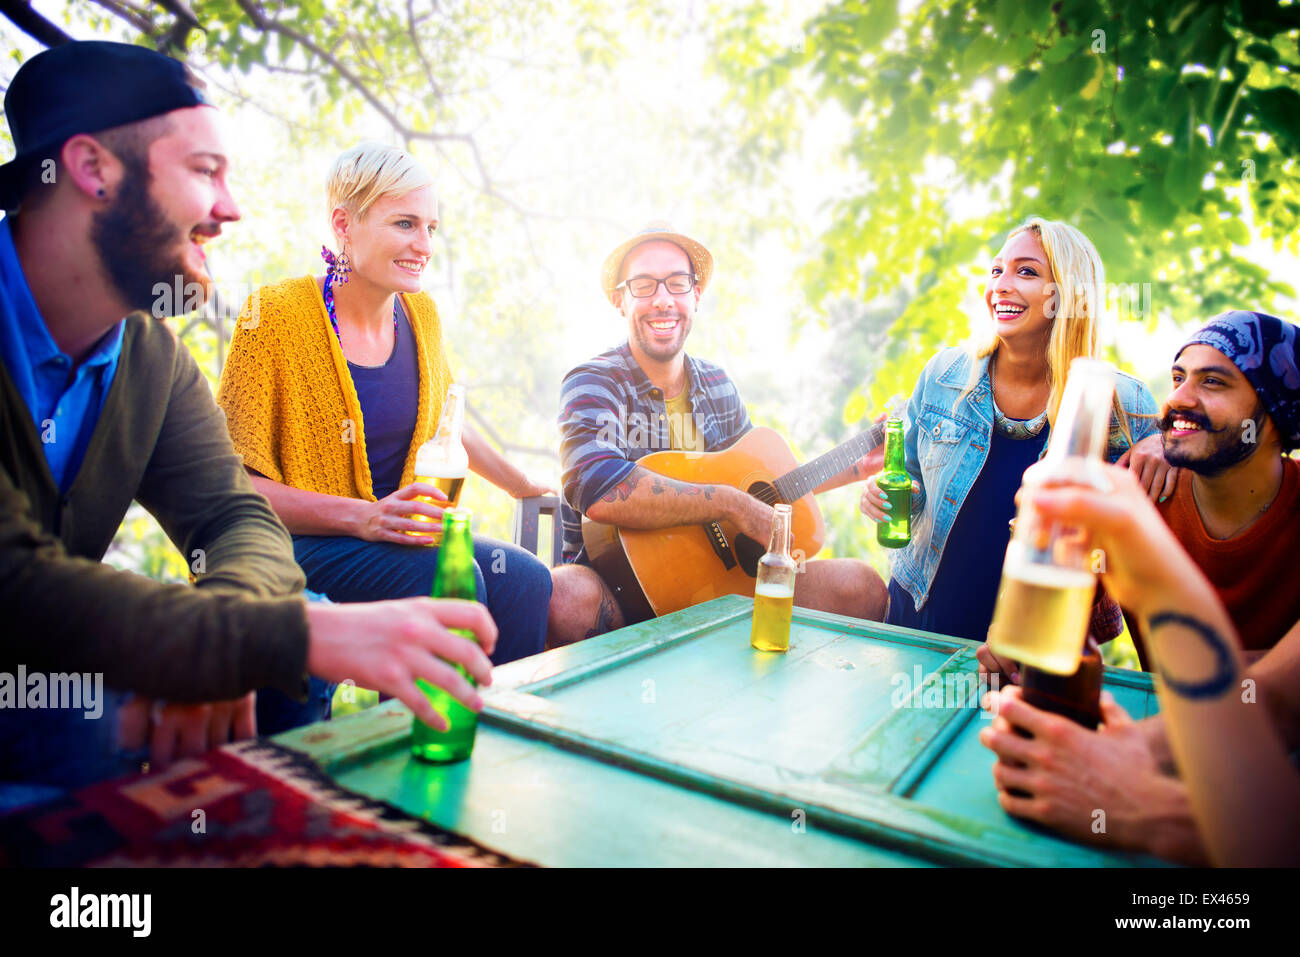 Diverse People Friends Hanging Out Drinking Concept Stock Photo